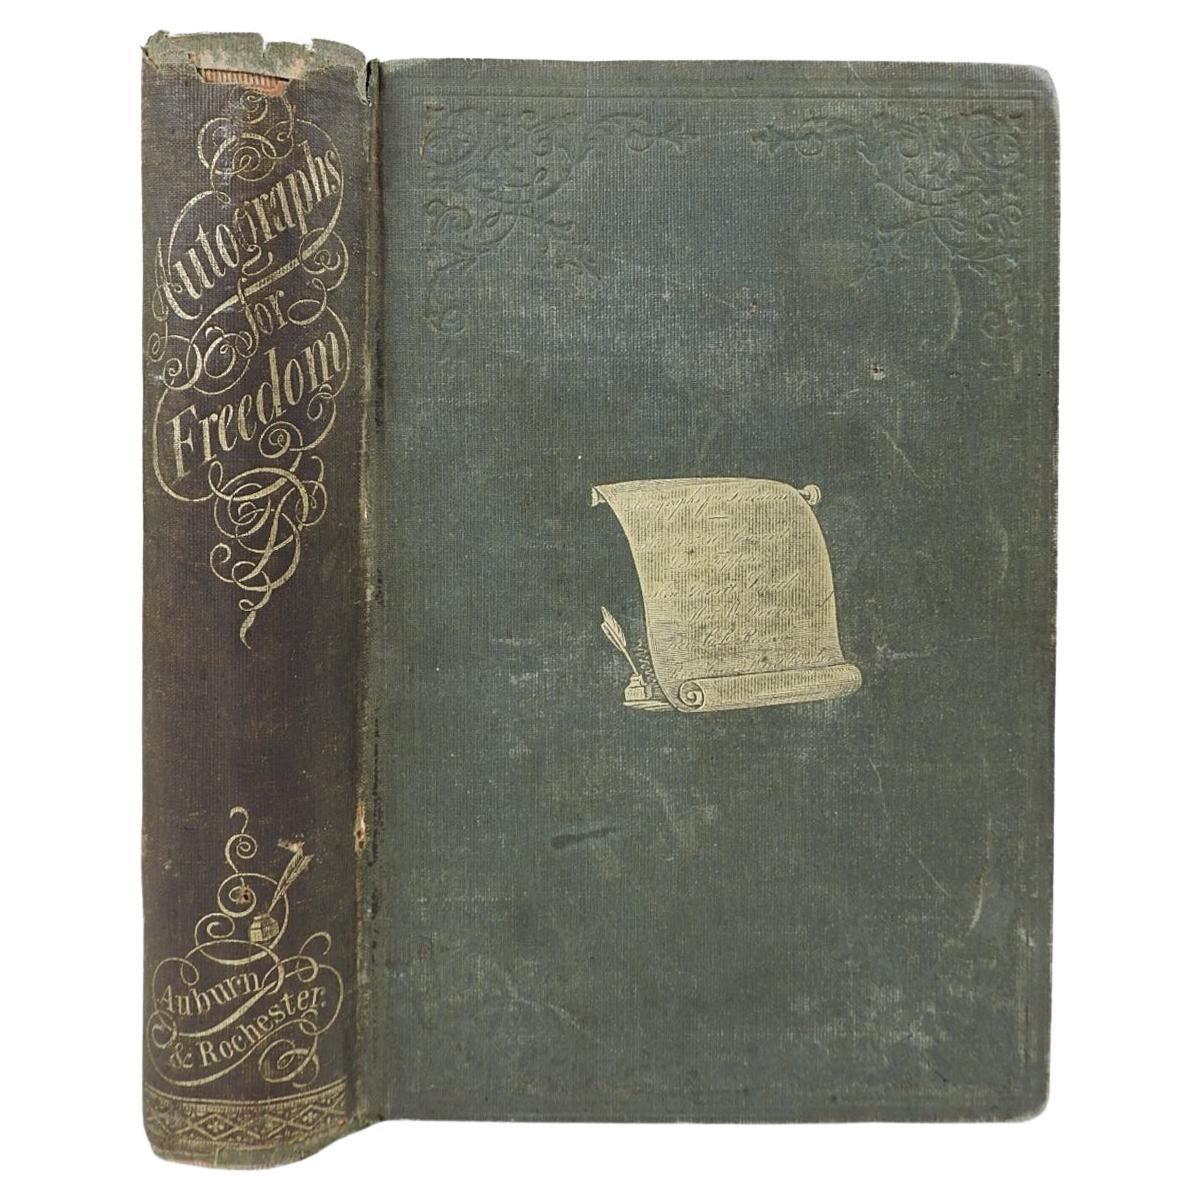 1854 Autographs for Freedom Abolitionist Book